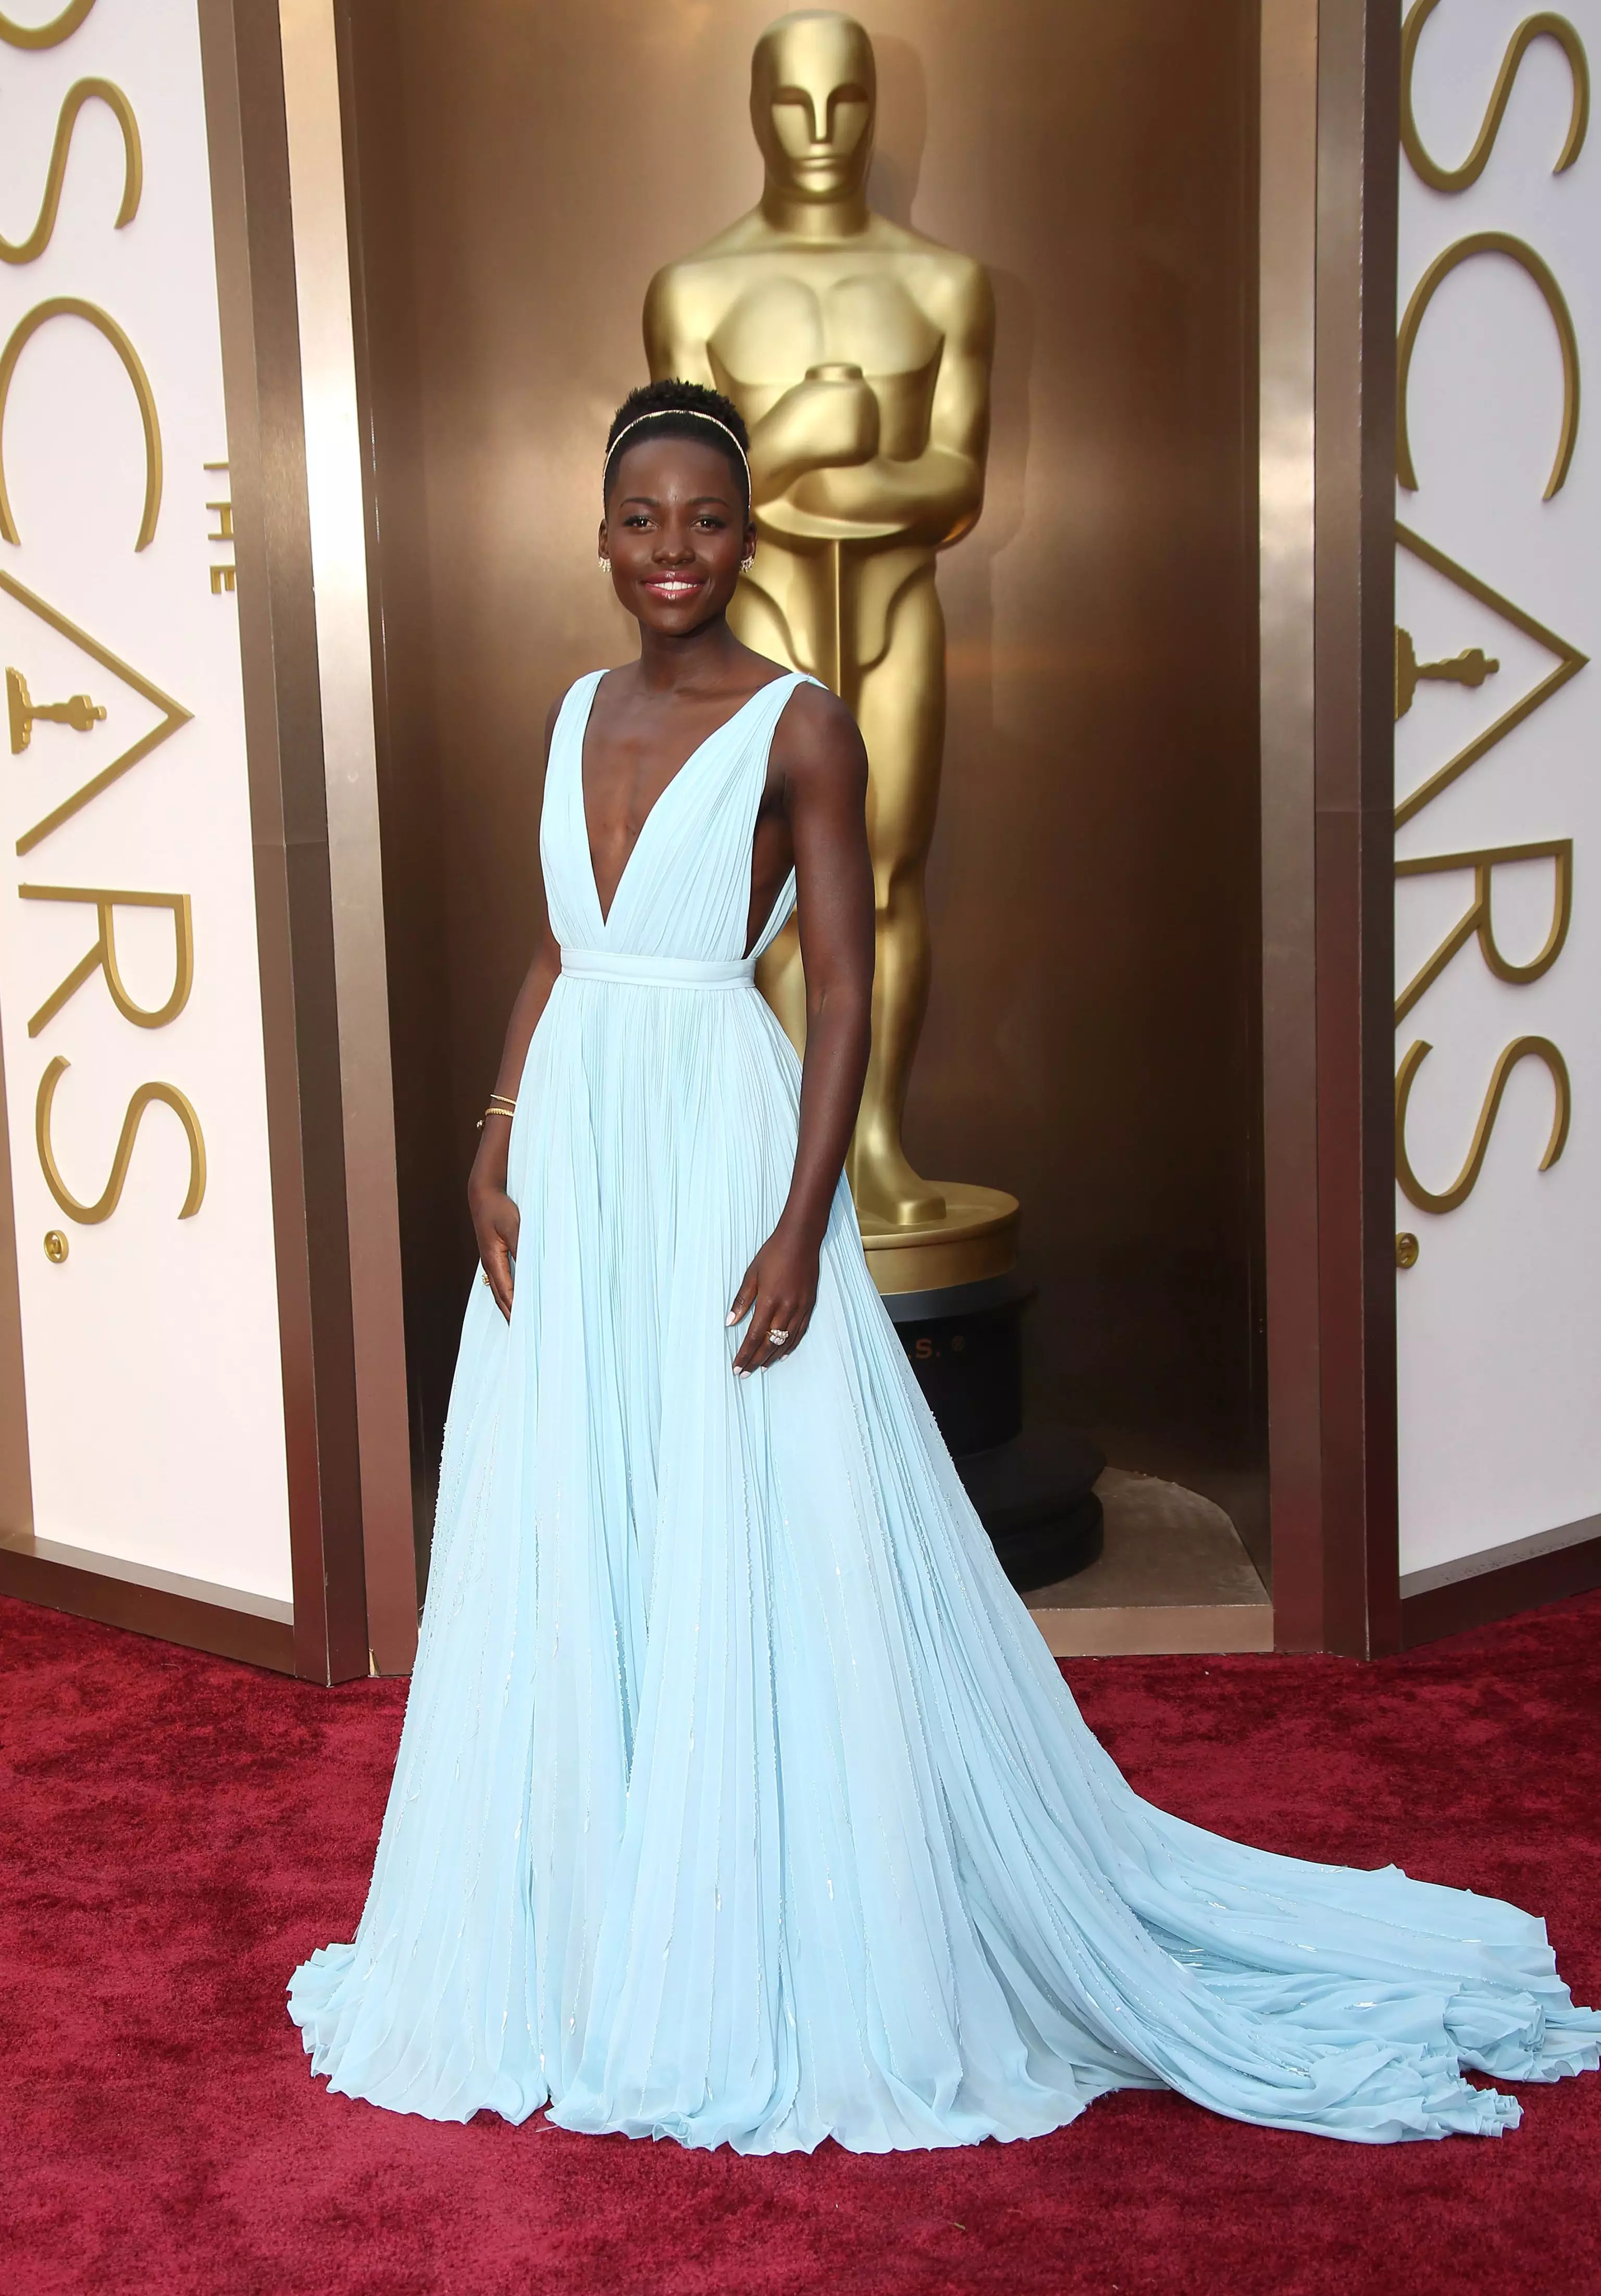 It was difficult not to compare Lupita Nyong'o's incredible Prada gown at the 2014 Oscars to that of Cinderella (Jim Smeal/BEI/Shutterstock).